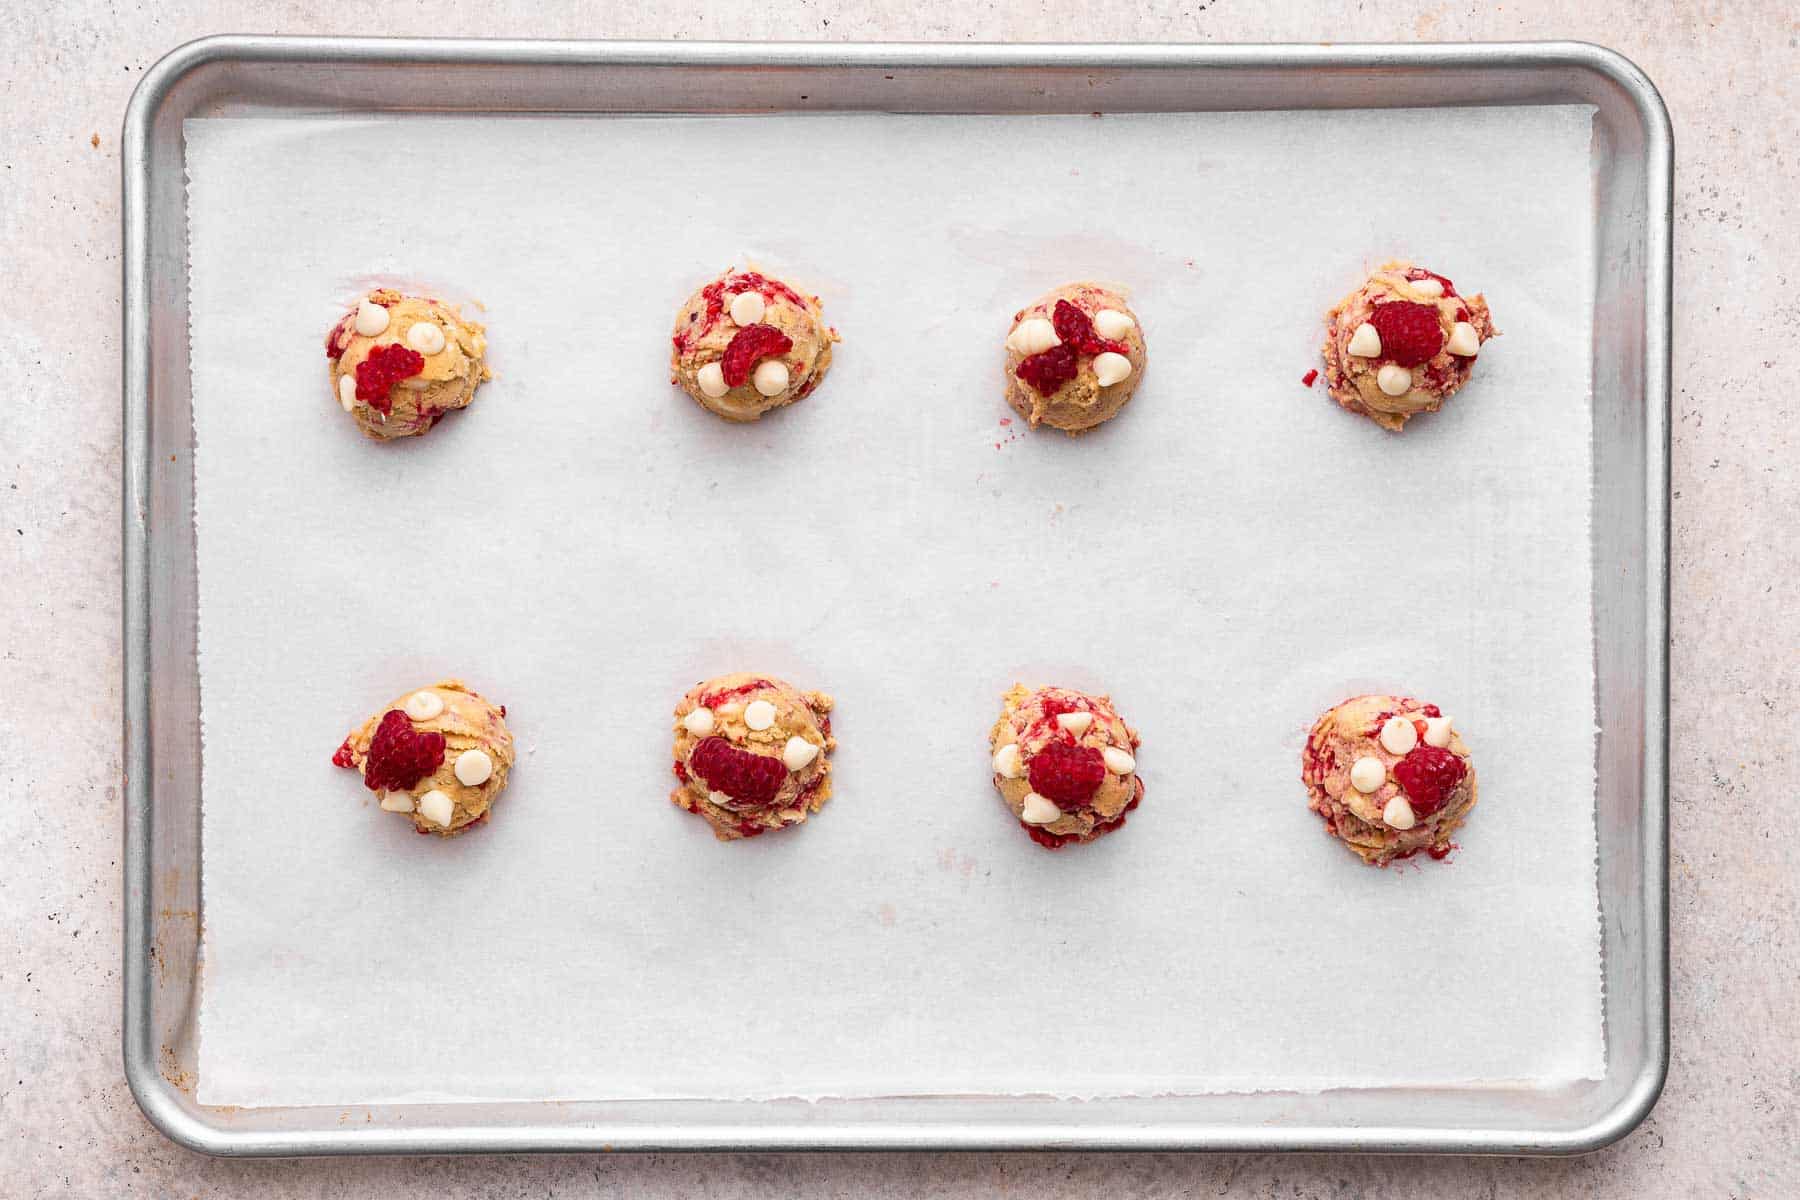 Eight balls of cookie dough with fresh raspberries on a cookie sheet.